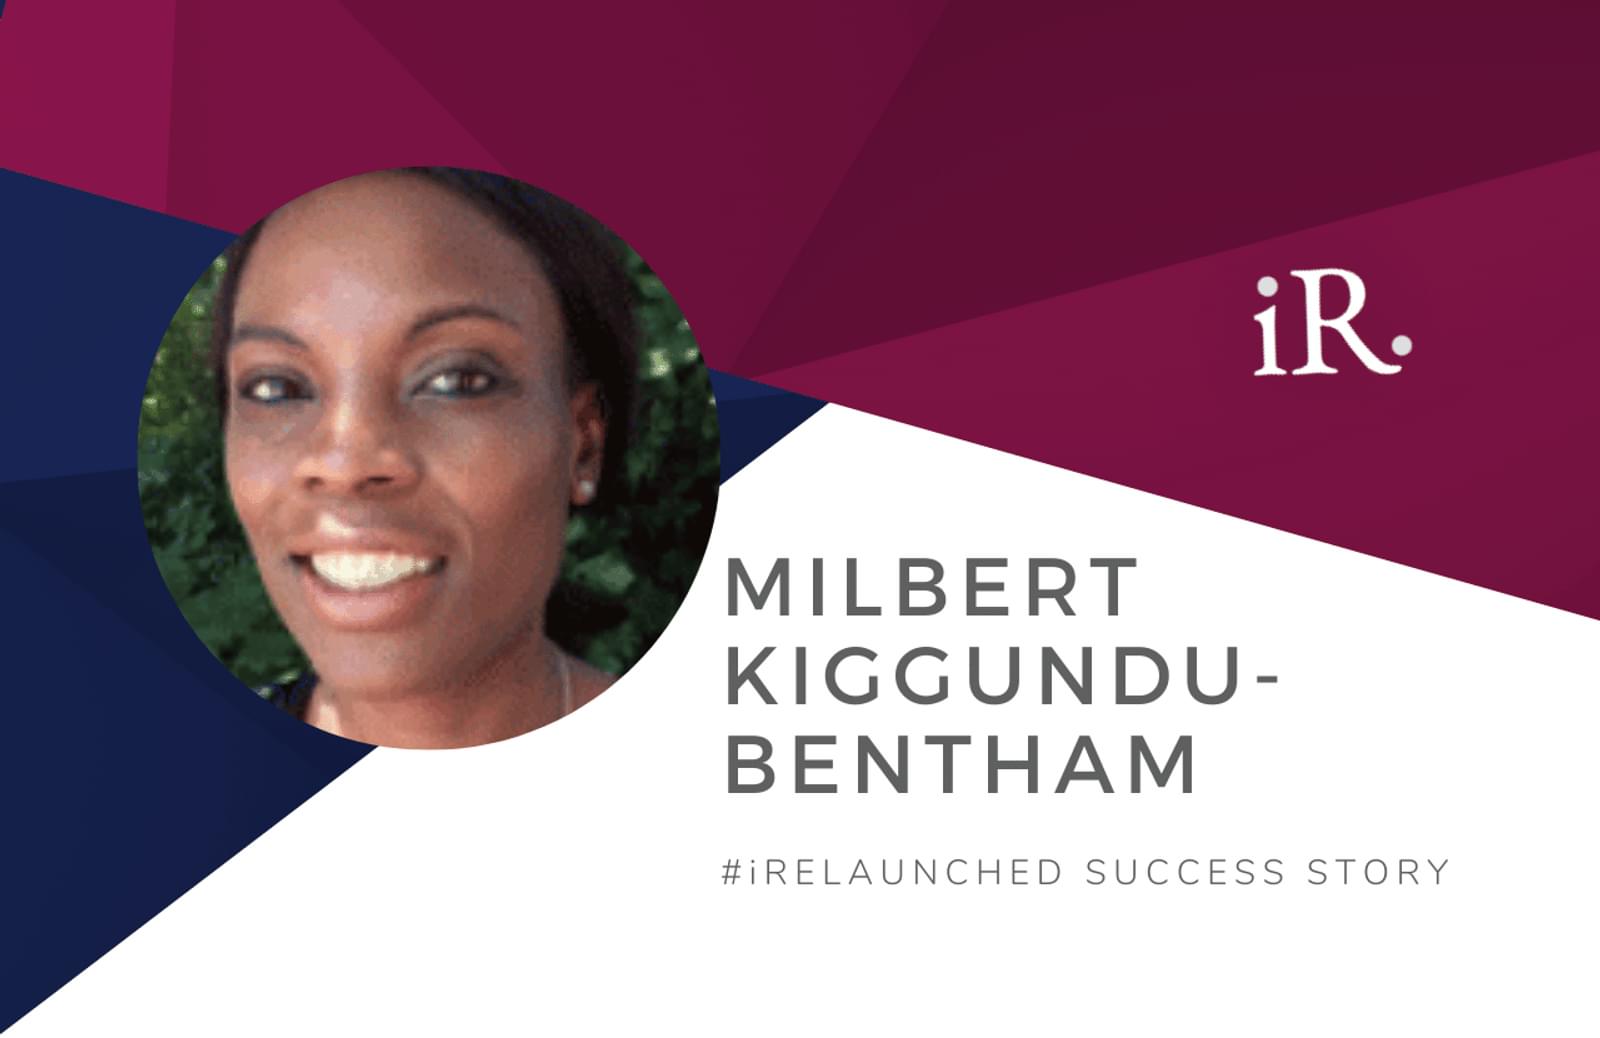 Milbert Kiggundu-Bentham's headshot and the text #iRelaunched Success Story along with the iRelaunch logo.  A navy and maroon geometric textured background intersect behind Milbert's headshot.